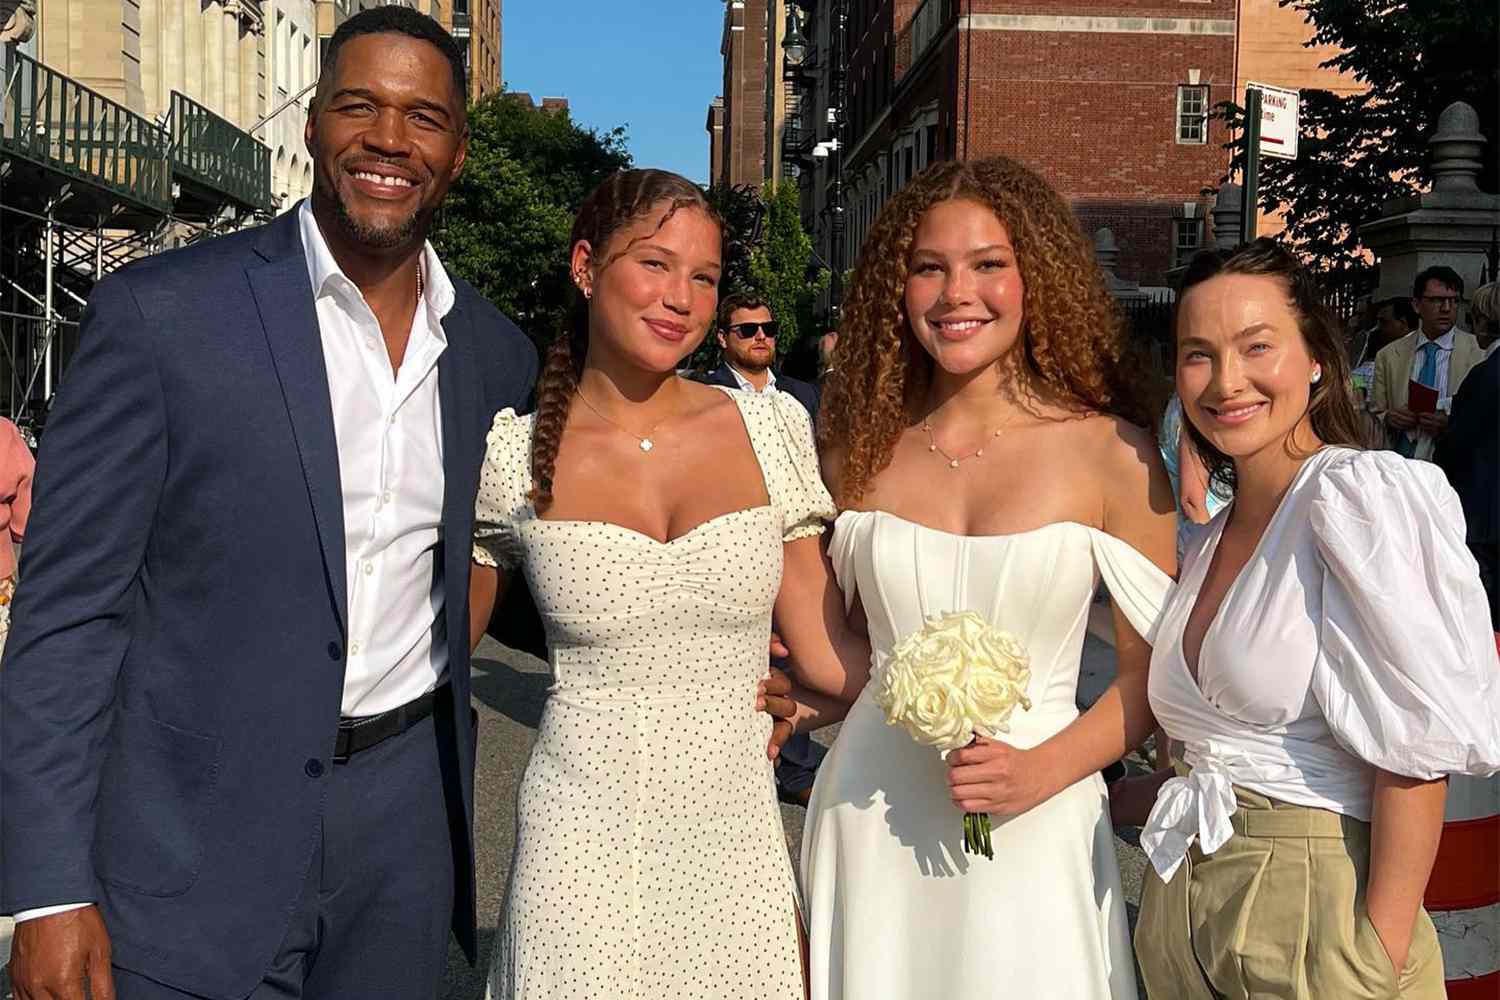 Michael Strahan's Daughter, Sophia Strahan Biography: Age, Boyfriend, Height, Net Worth, Mother, Pictures